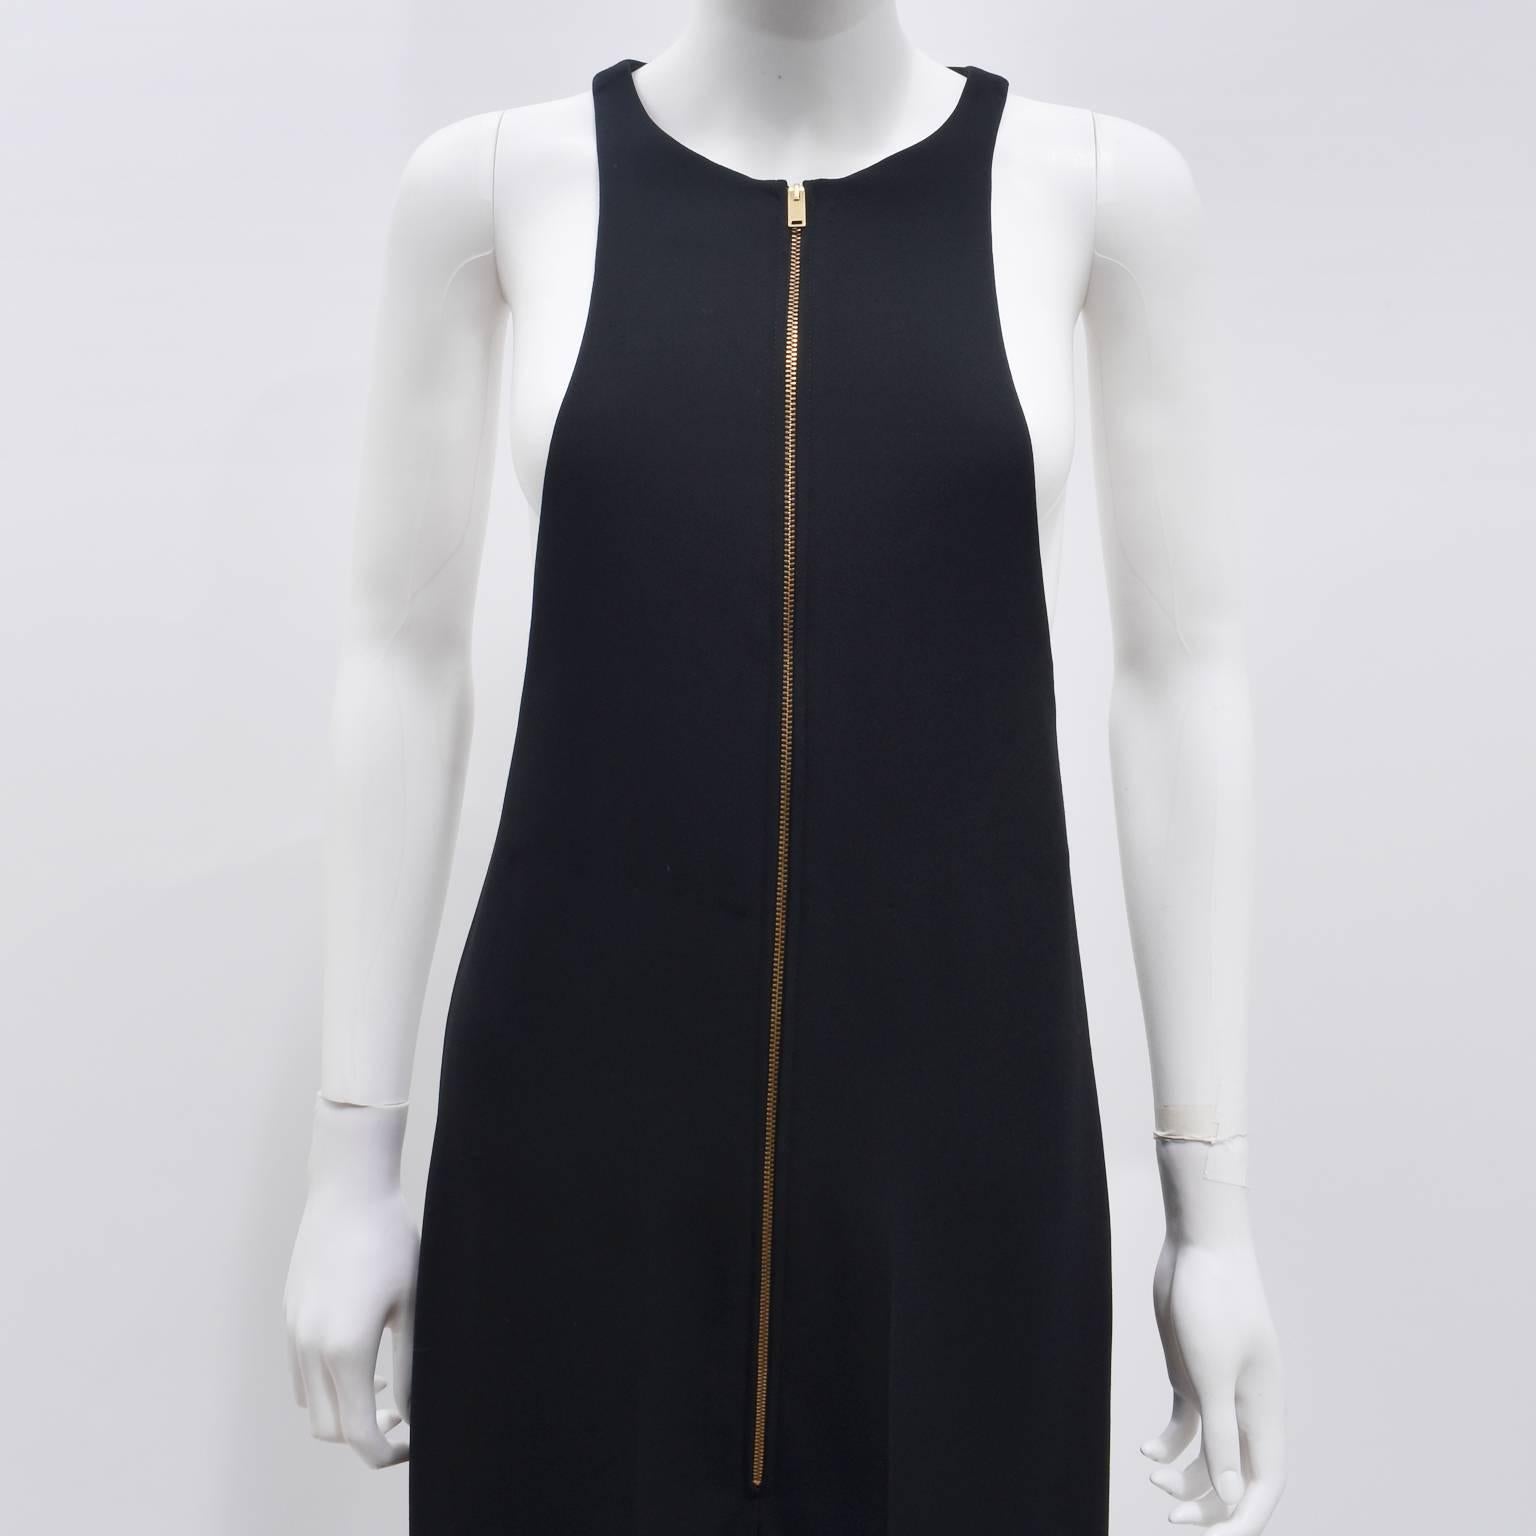 An elegant black sleeveless jumpsuit from Celine. The jumpsuit has a slim tailored fit with long trousers and a pleat down the centre fold. The top part of the jumpsuit is a sleeveless, bib-style top with open sides. There is also a gold zip